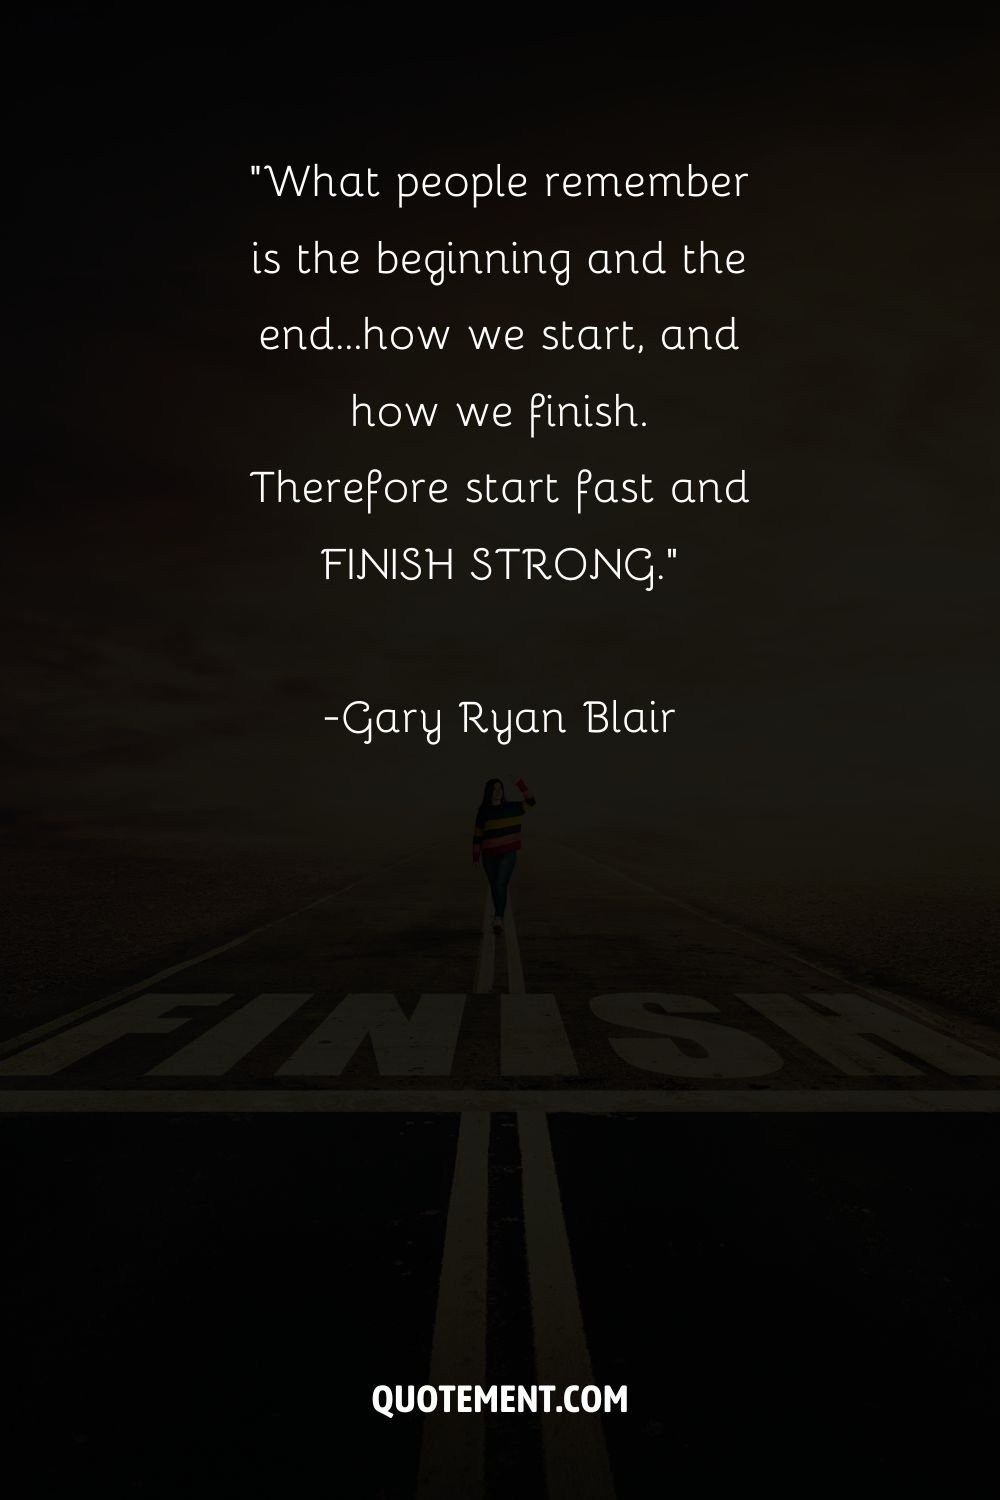 a woman standing on the finish line representing the greatest quote about finishing strong